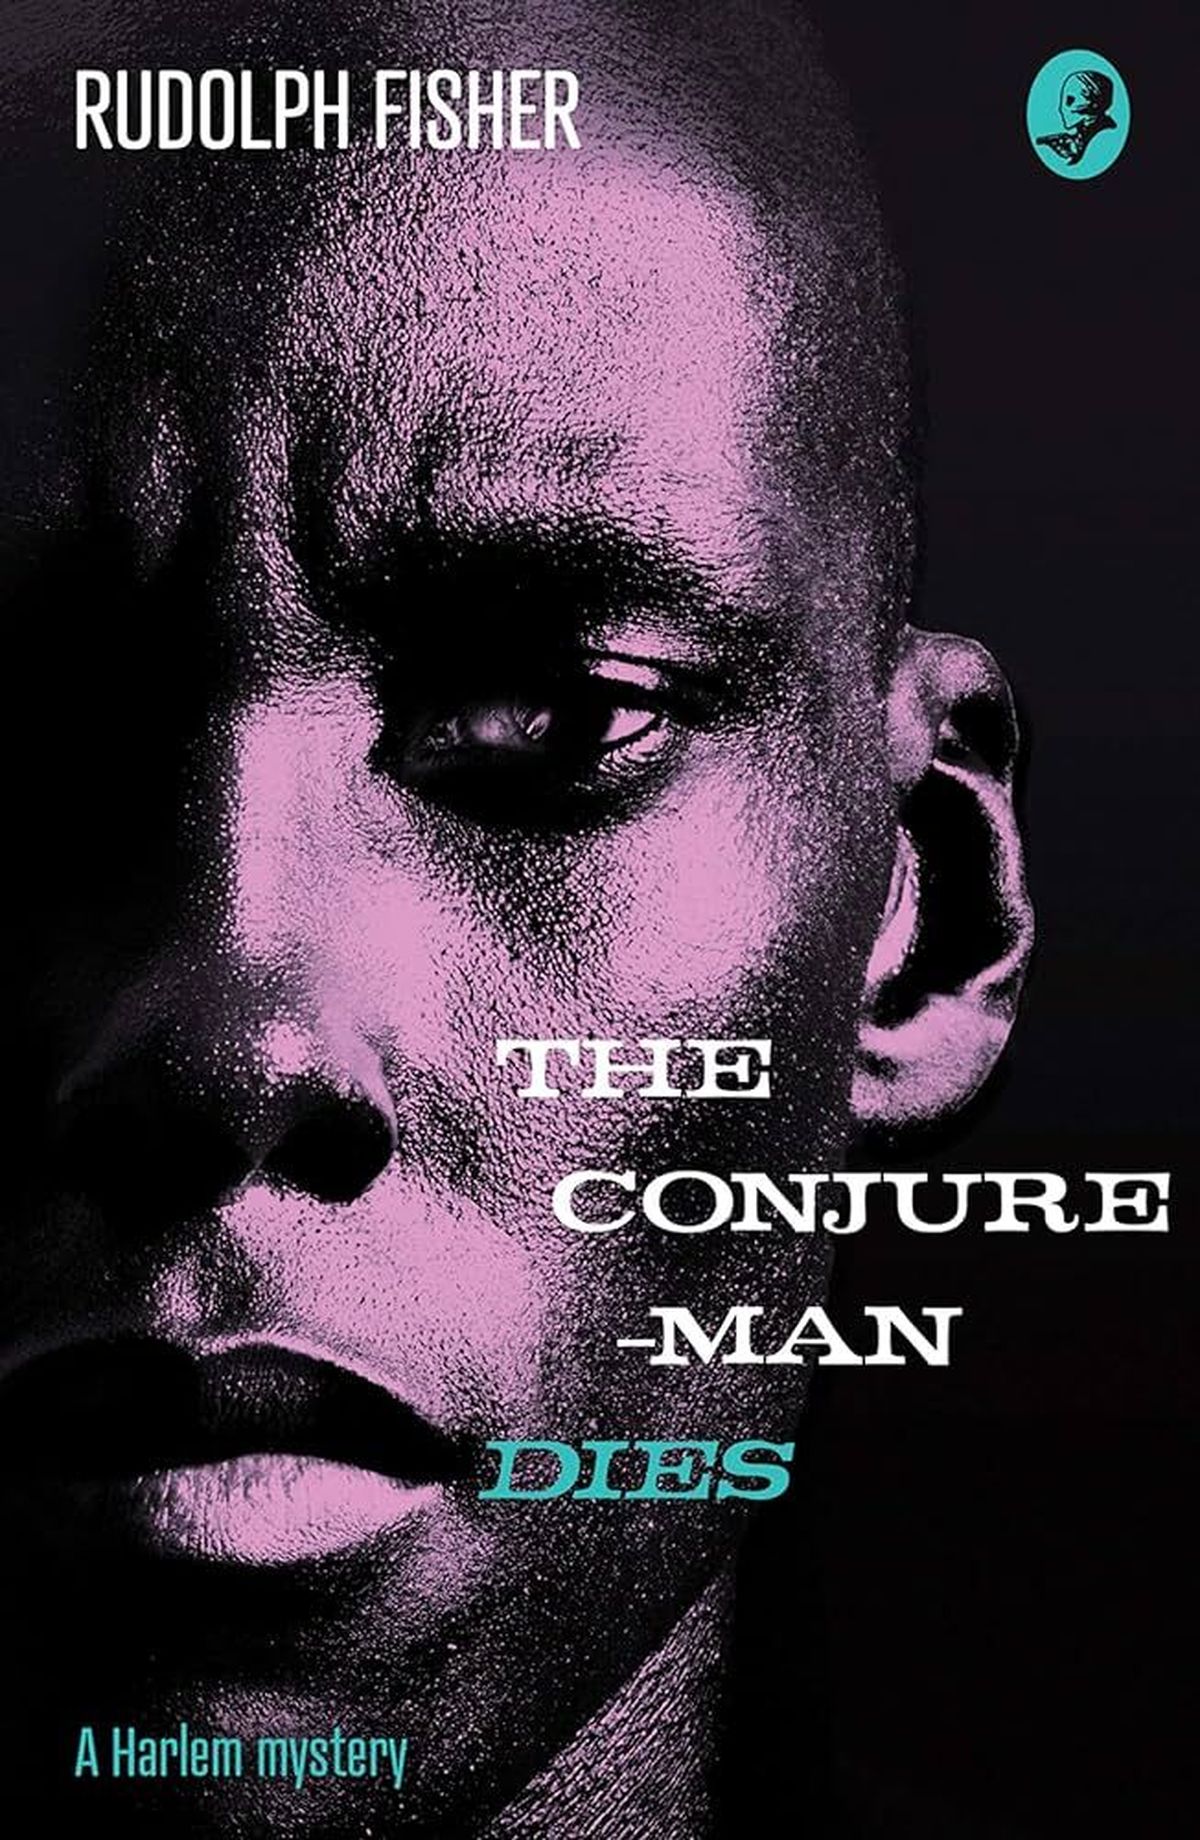 “The Conjure-Man Dies” by Rudolph Fisher 